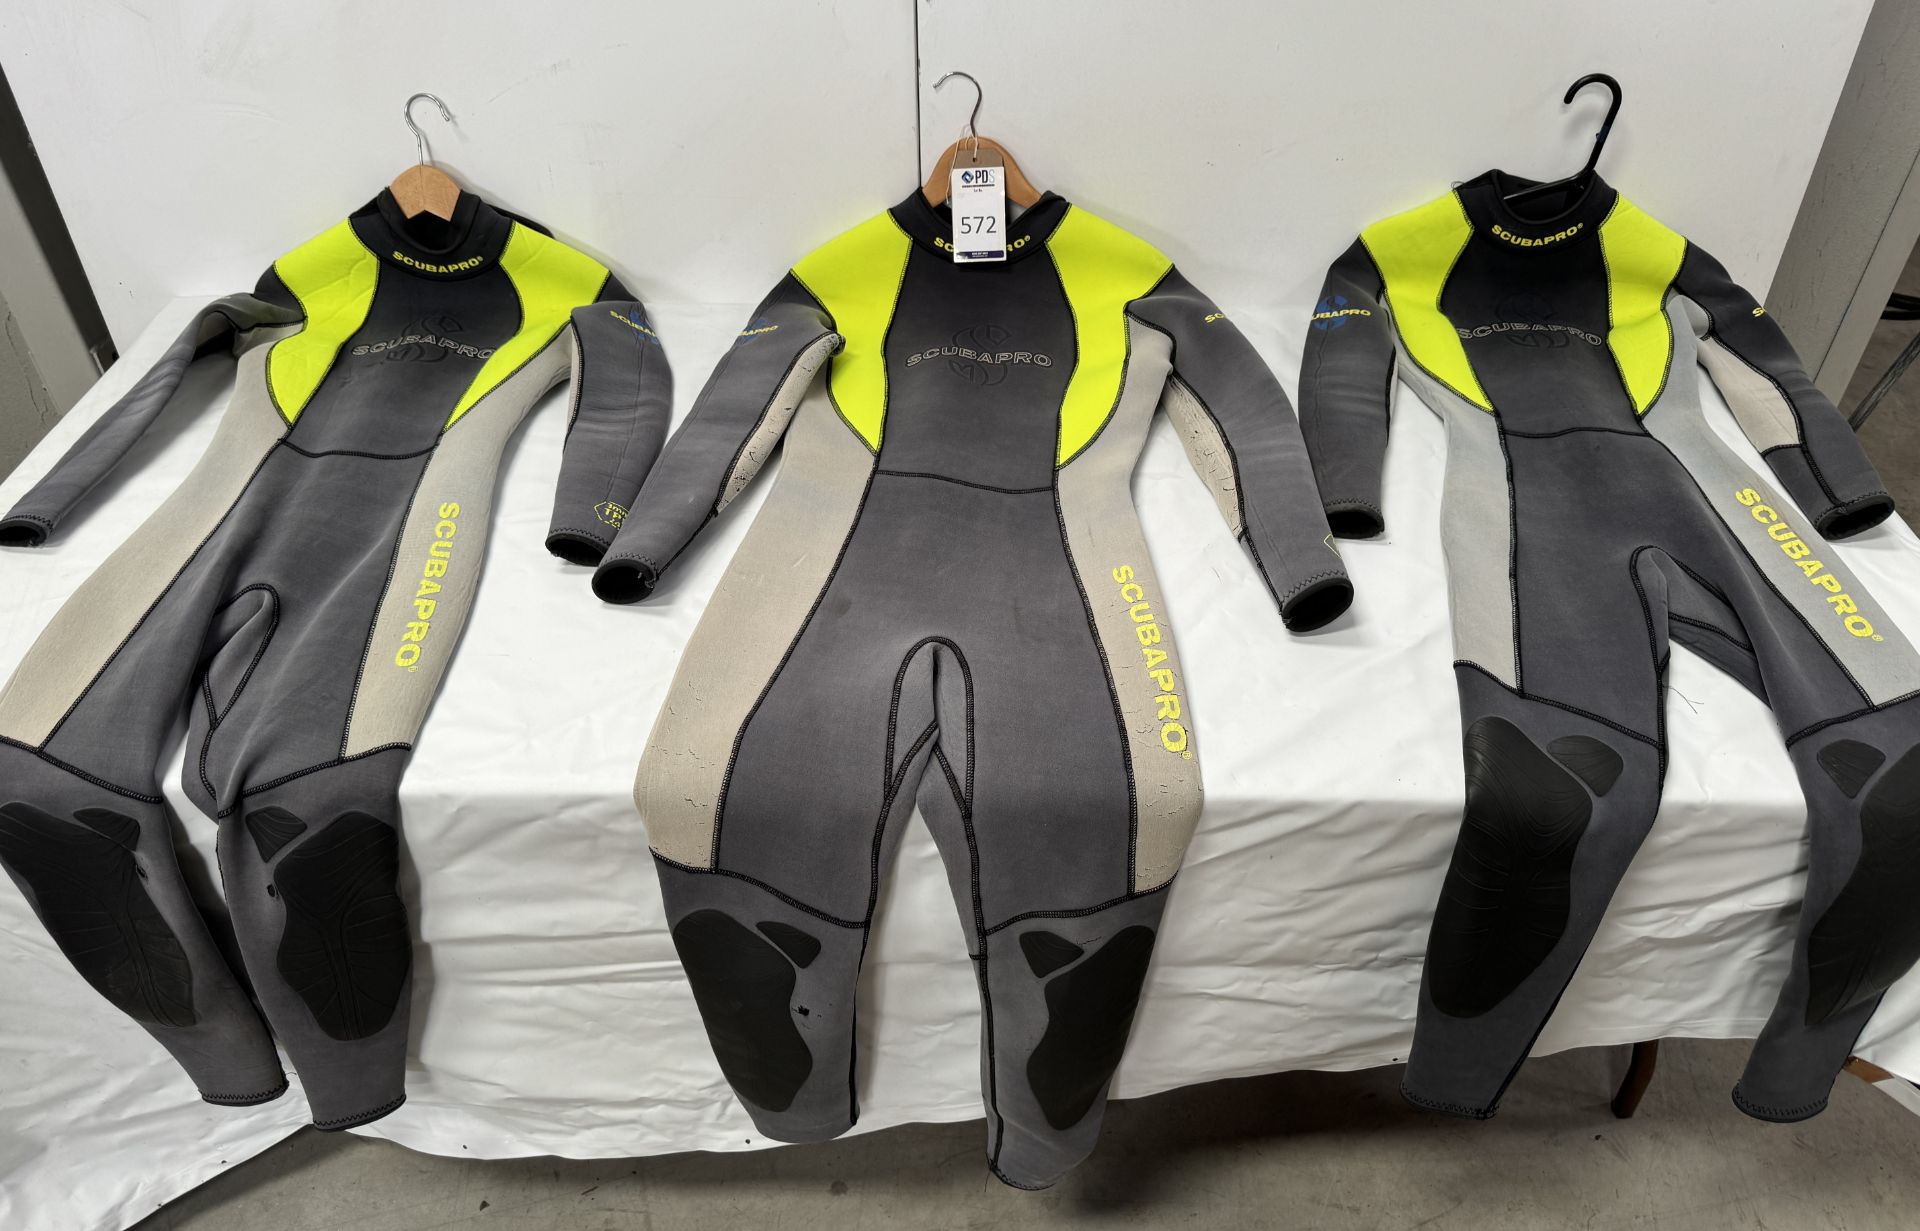 Three Scuba Pro Wetsuits (Location: Brentwood. Please Refer to General Notes)